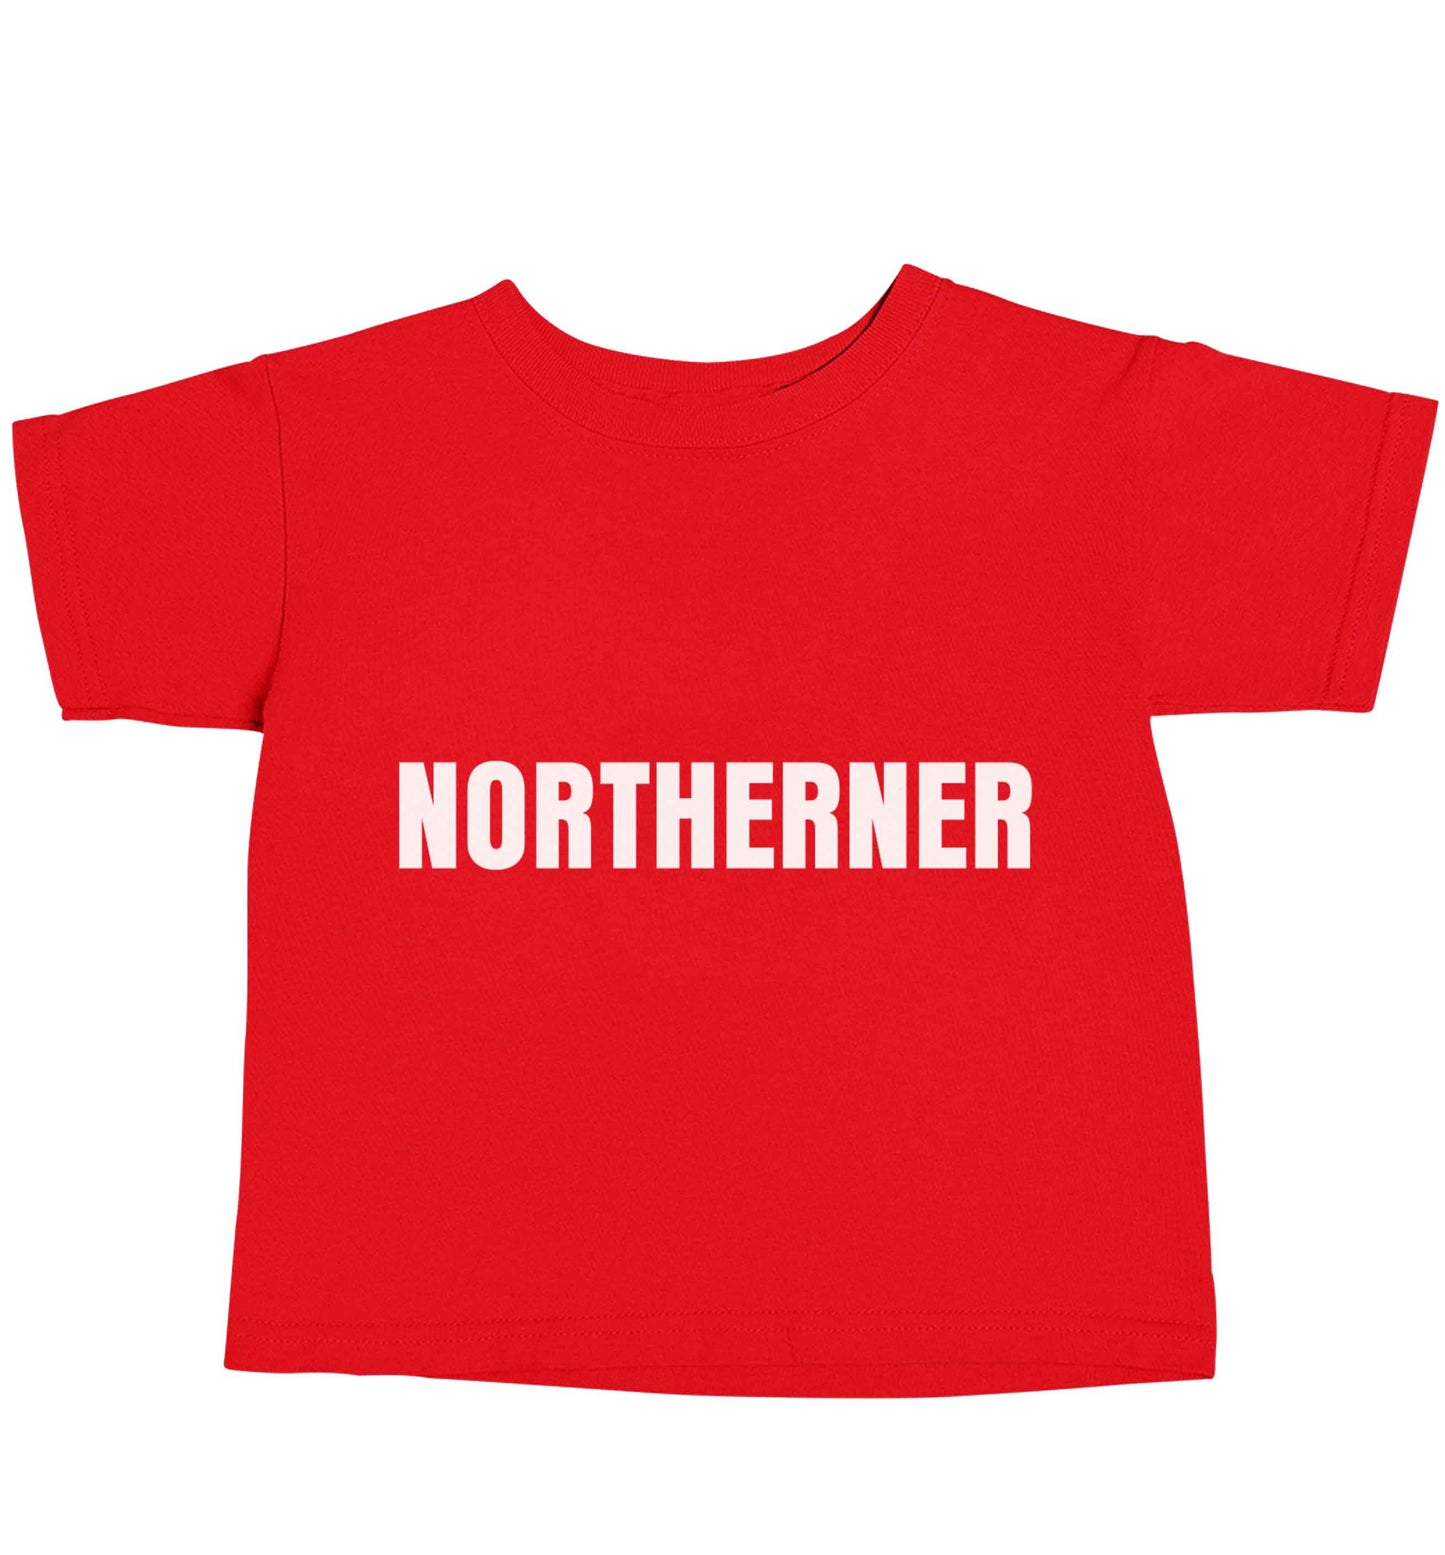 Northerner red baby toddler Tshirt 2 Years